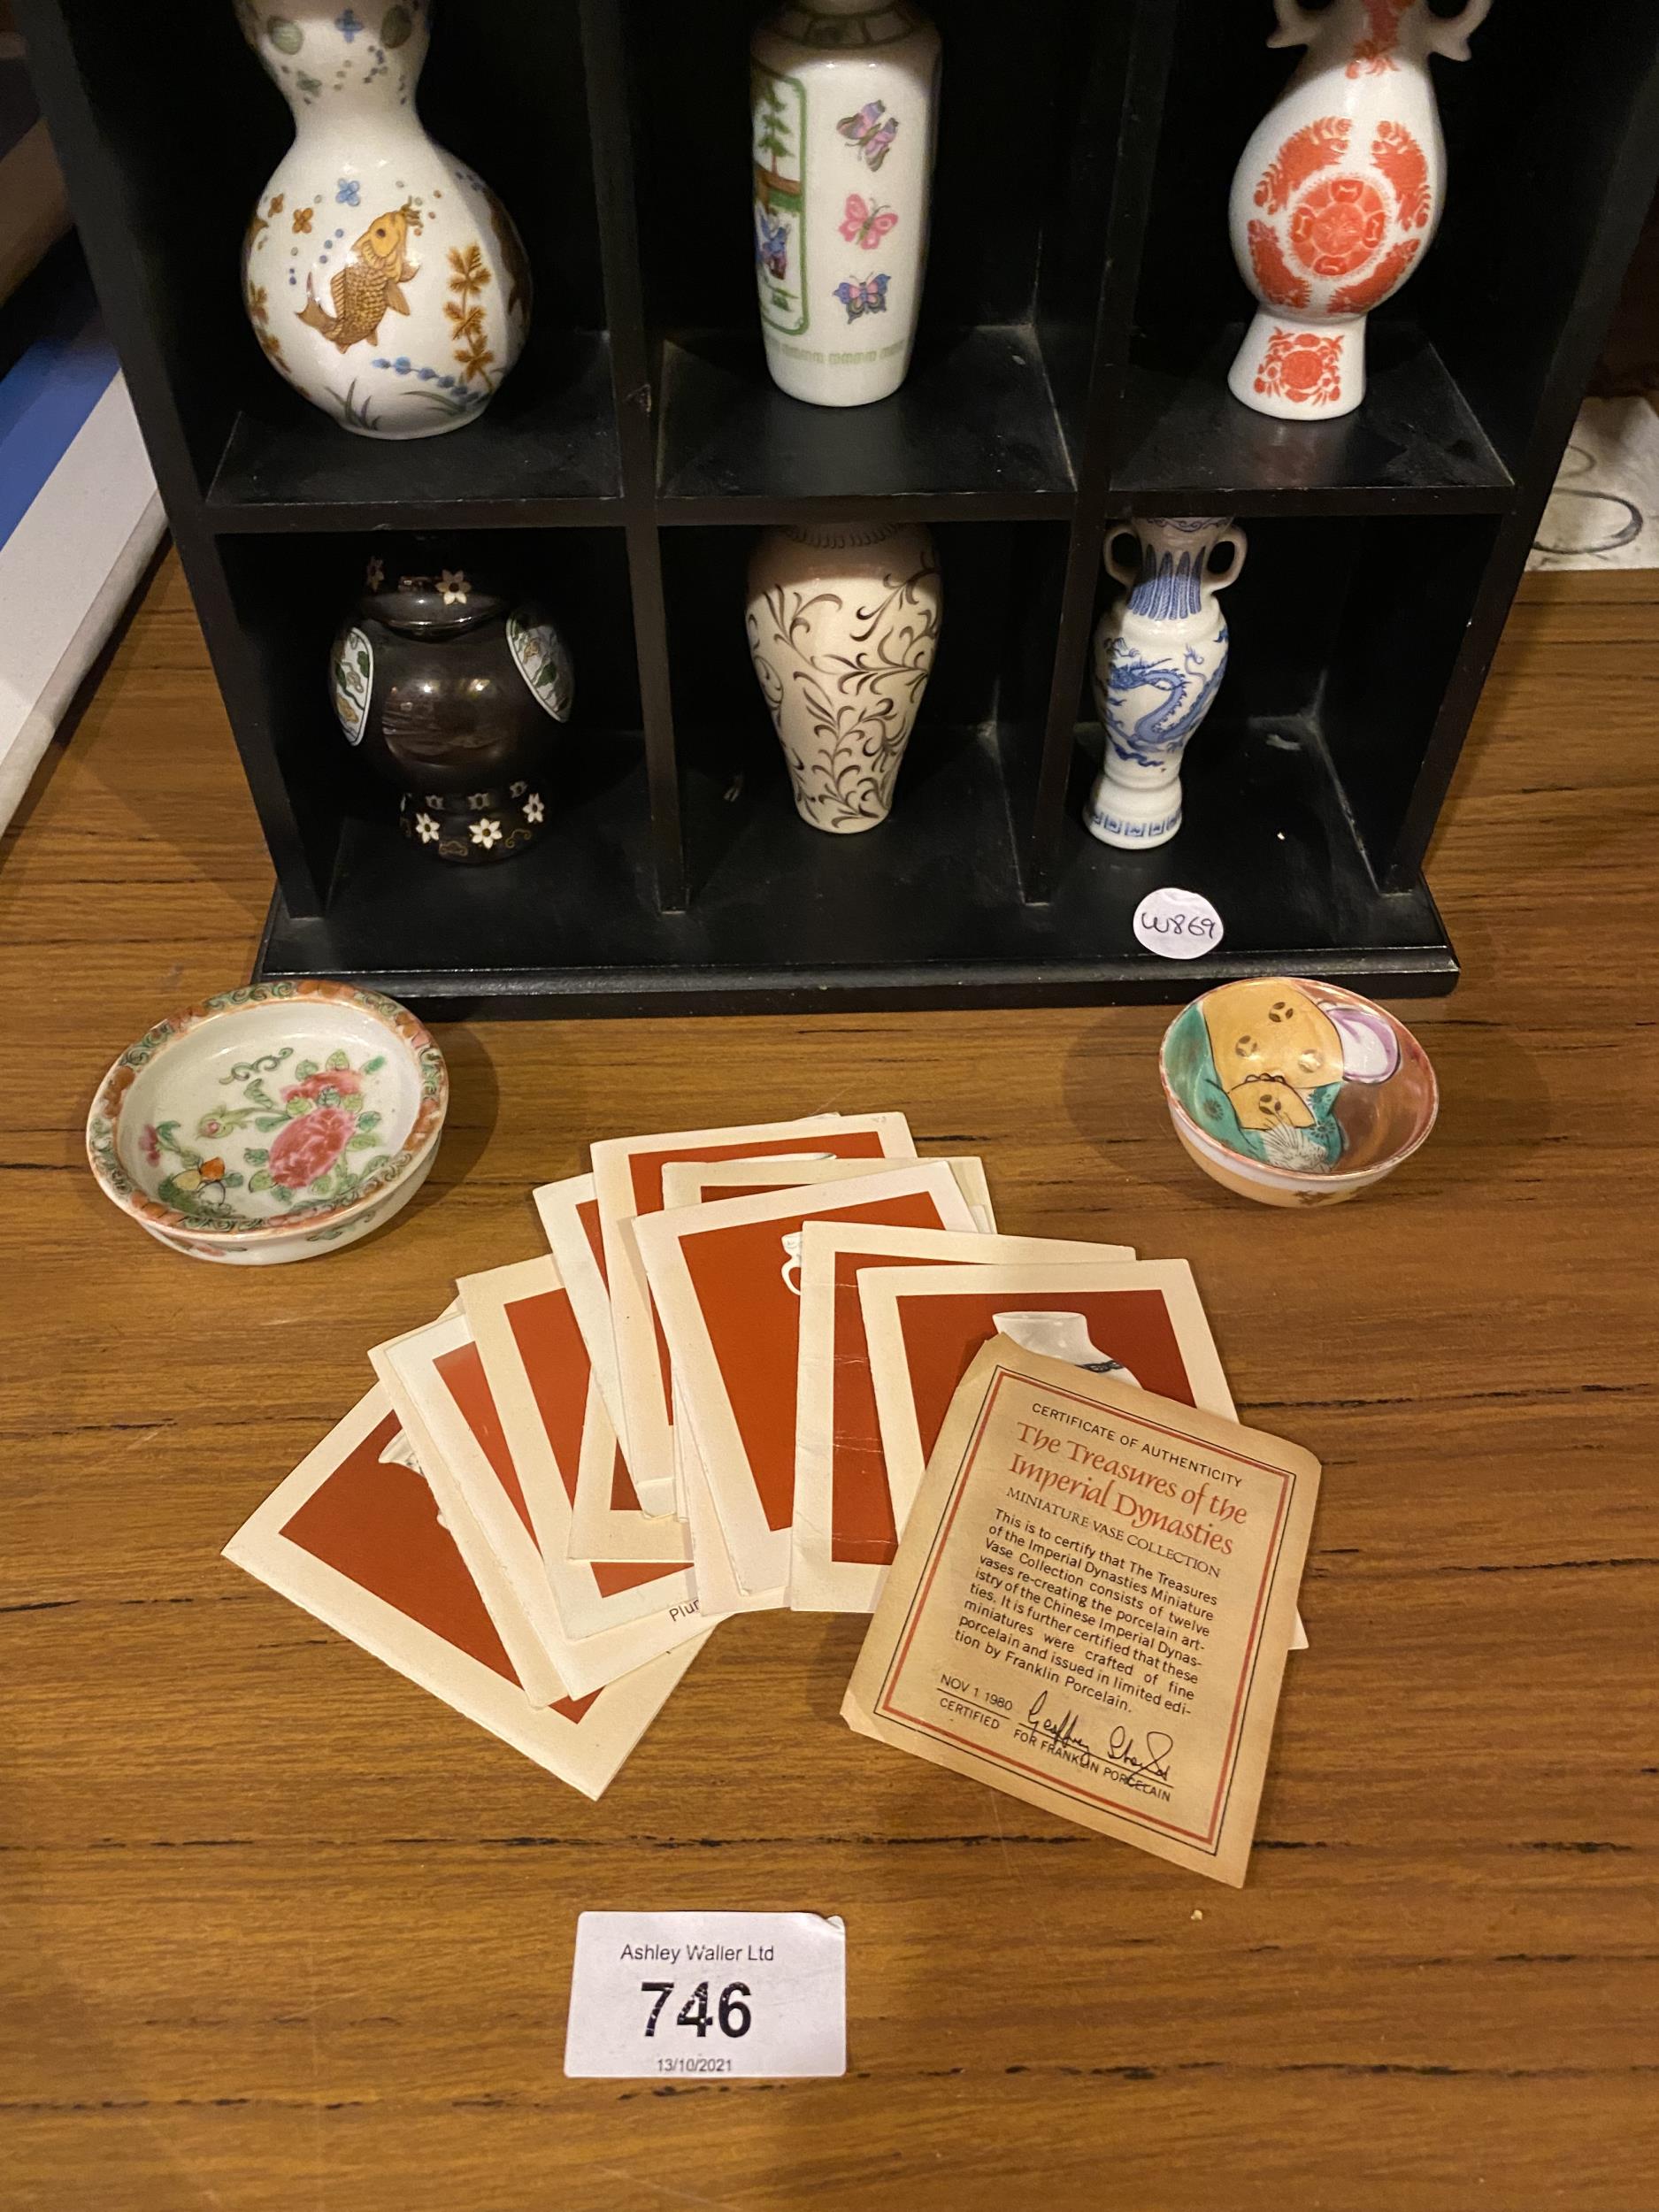 A SMALL DISPLAY CABINET WITH MINIATURE ORIENTAL STYLE VASES. ALSO INCLUDES INFORMATION CARDS AND TWO - Image 3 of 3